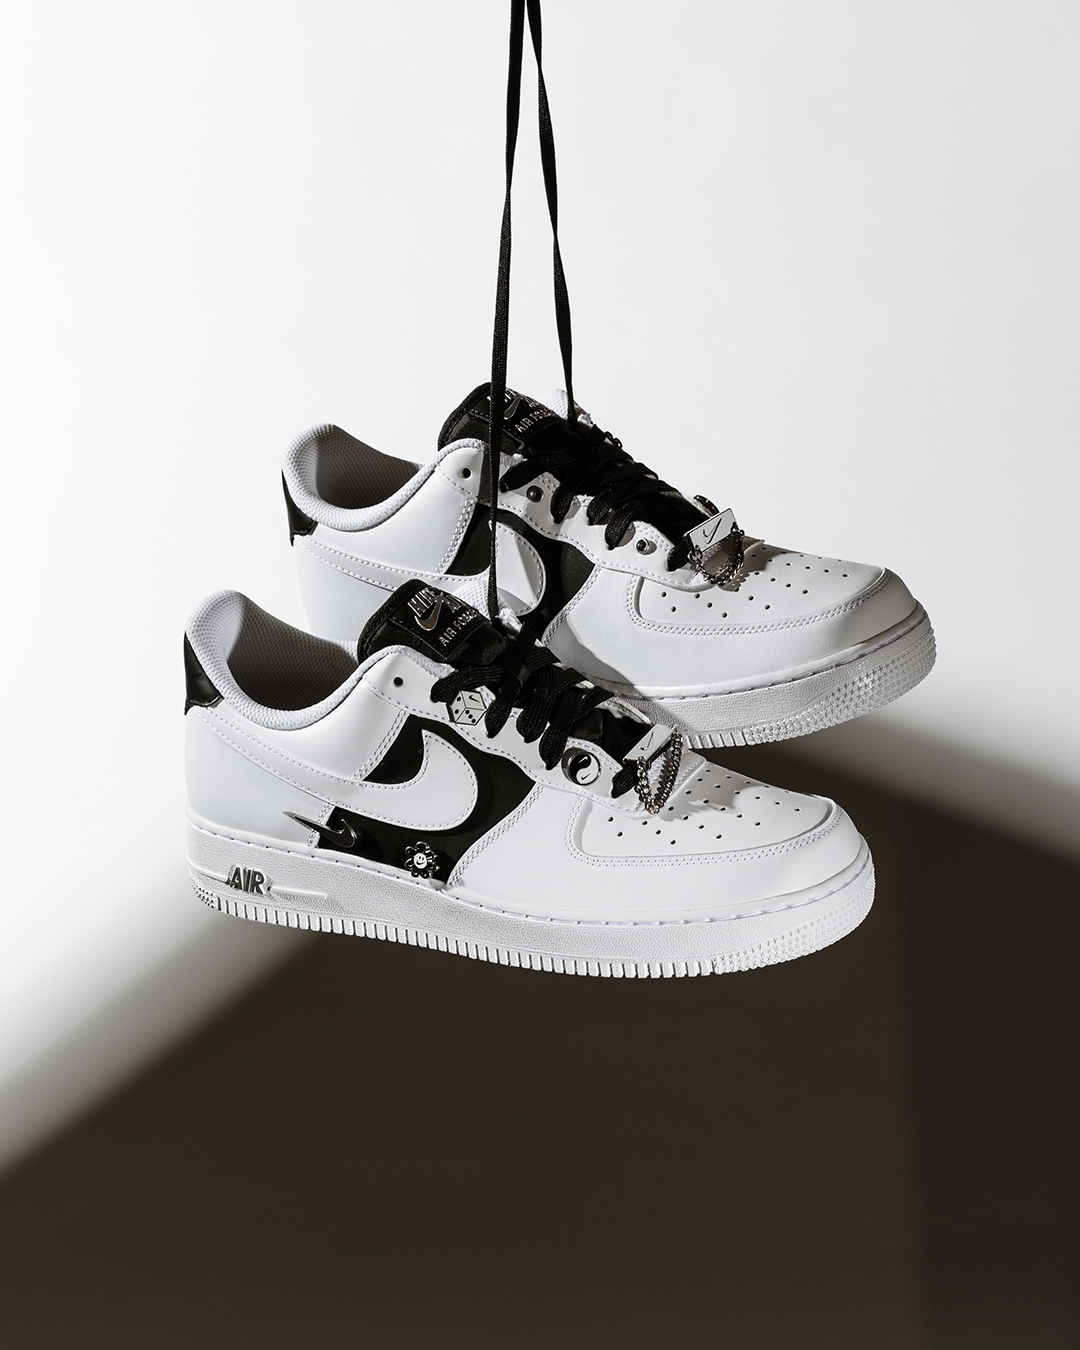 Foot Locker on Twitter: "A few pieces to complement the AF1 💎 #Nike Air Force One 'Shoelery' available online + in-store. Shop: https://t.co/t2QkOWHTv2 Twitter